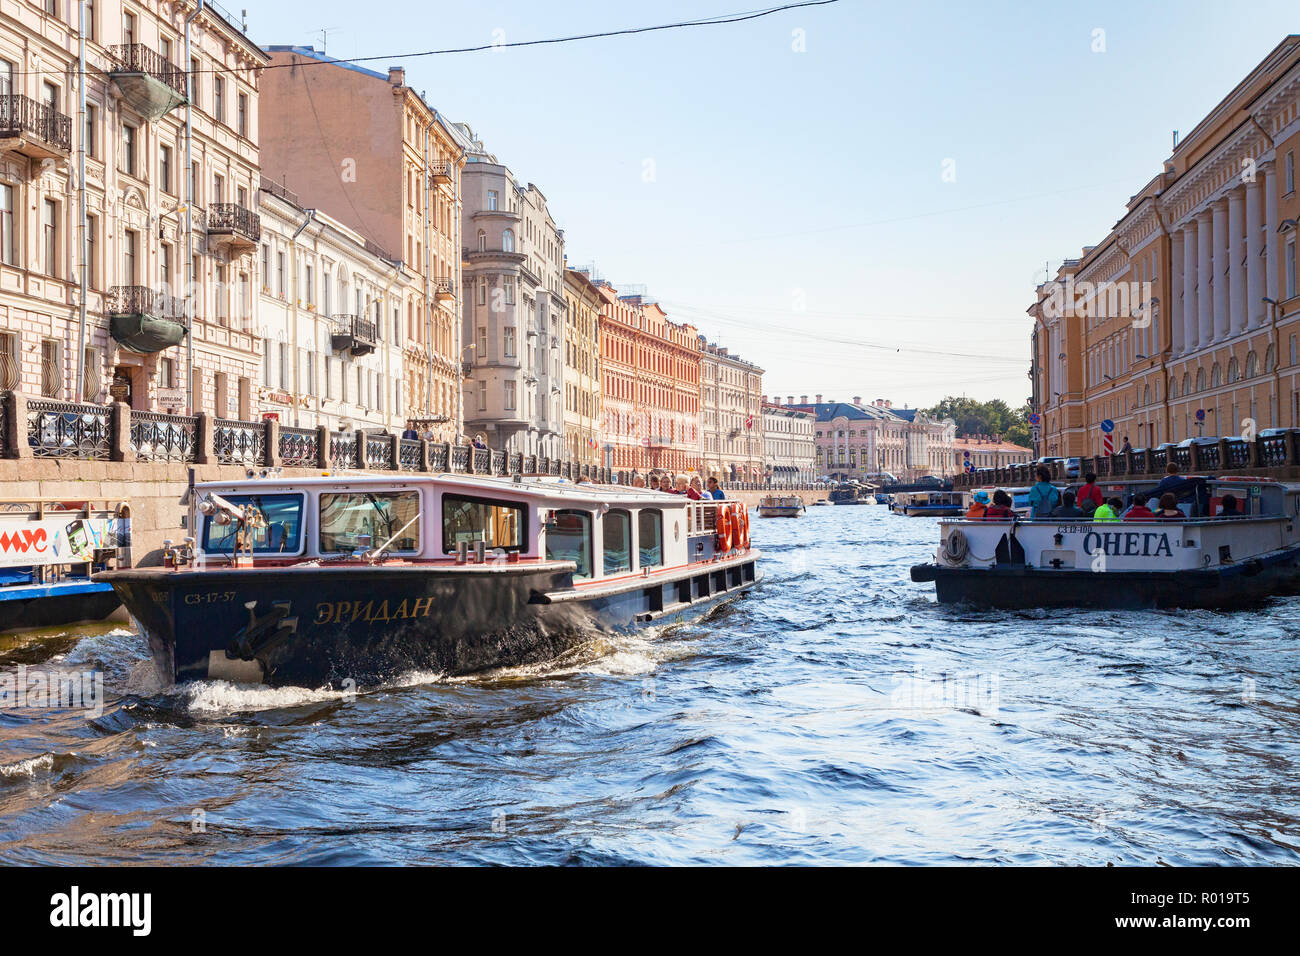 19 September 2018: St Petersburg, Russia - Sightseeing boats on the River Neva, Stock Photo